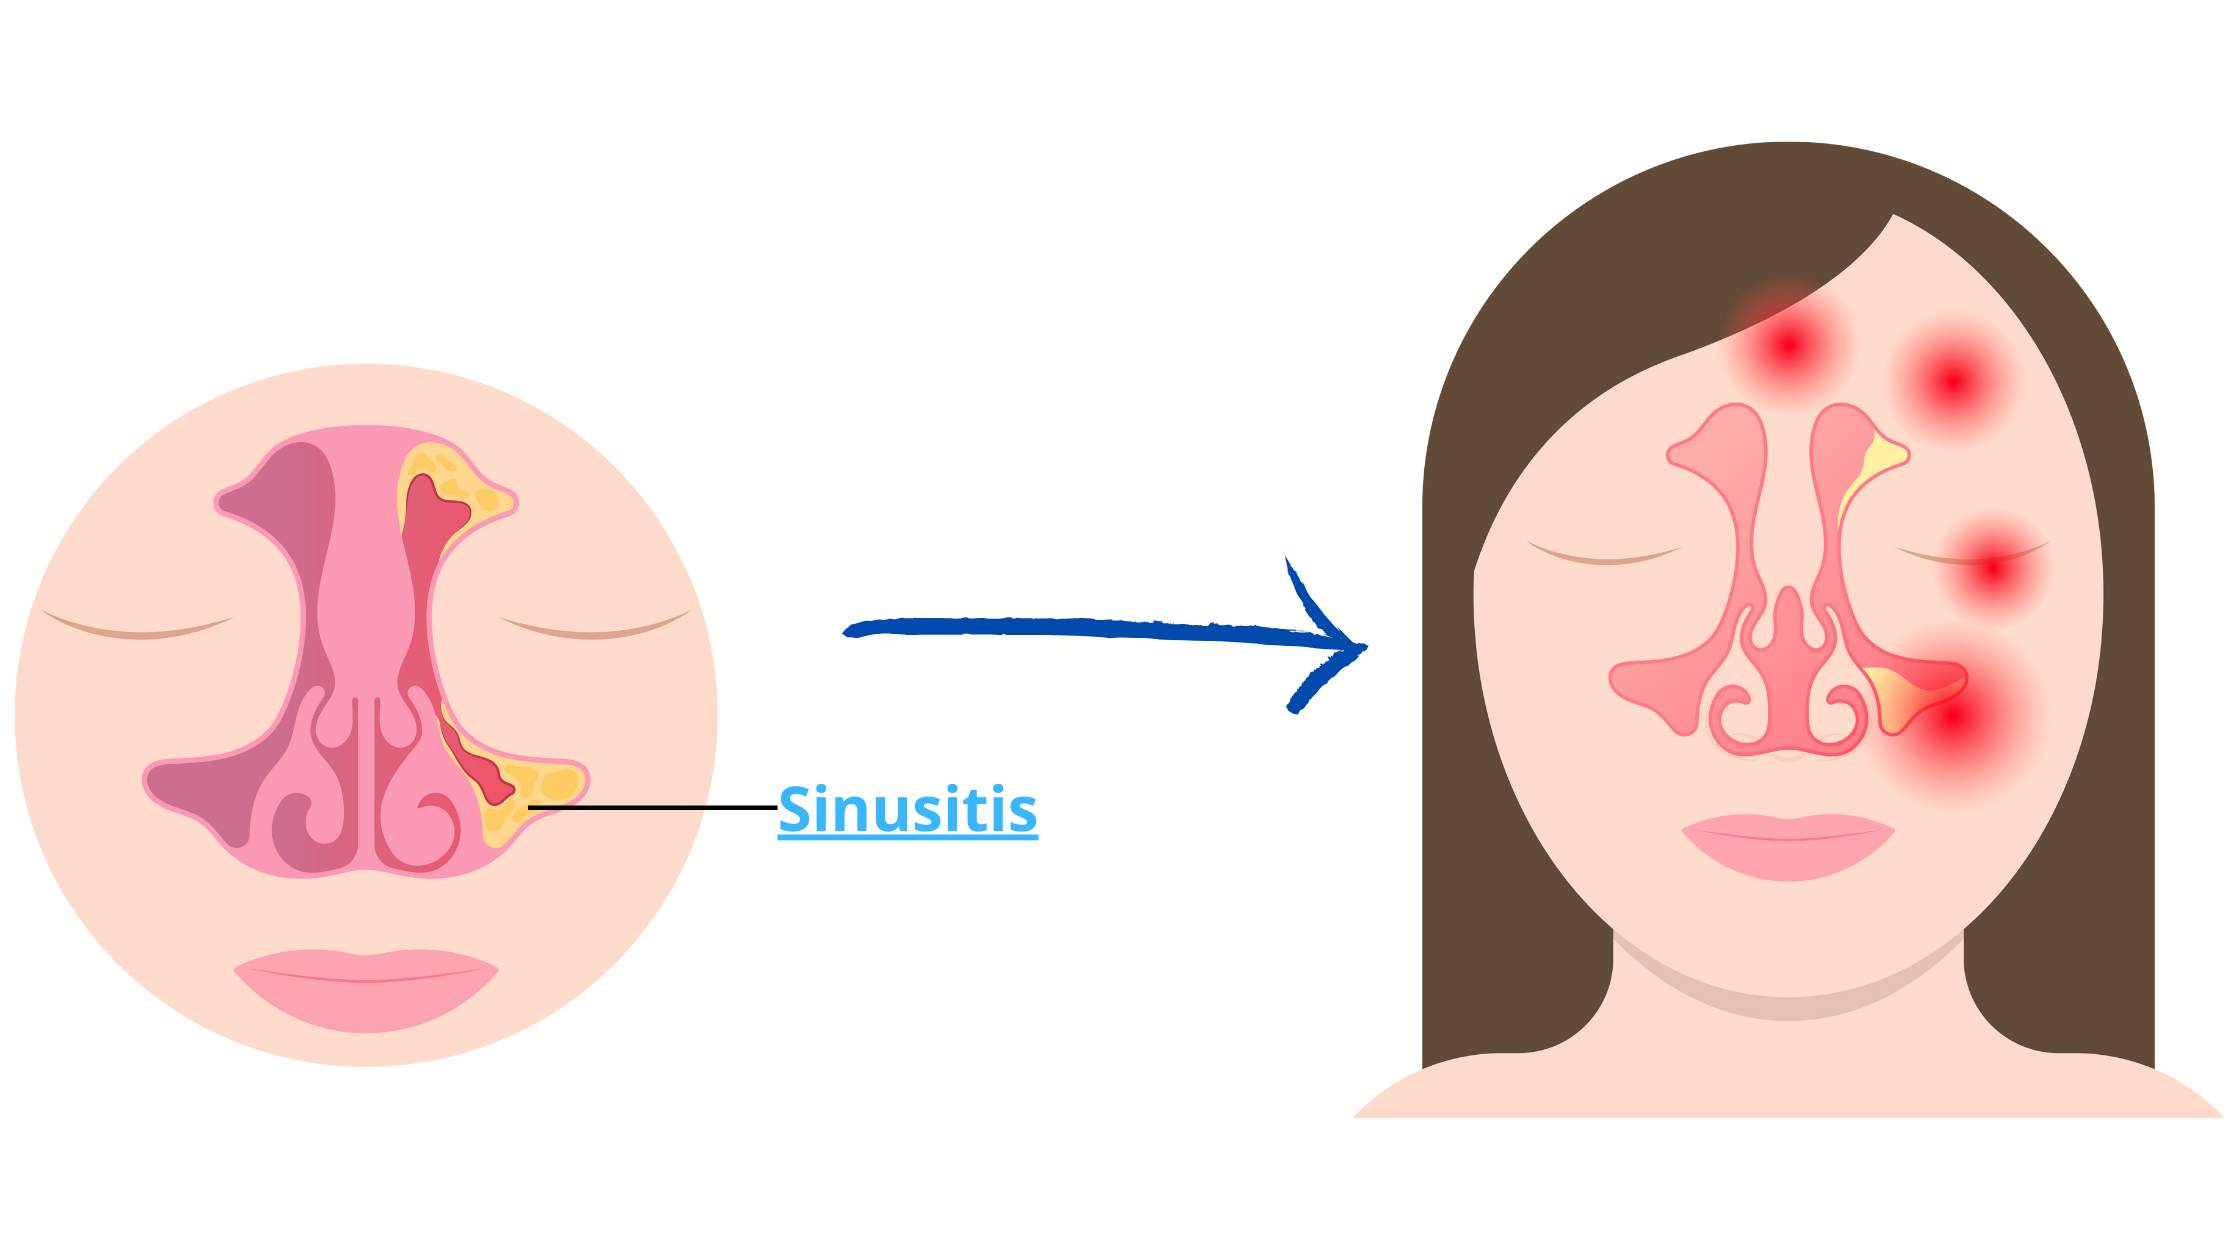 The way sinusitis pain can spread to areas of the face 